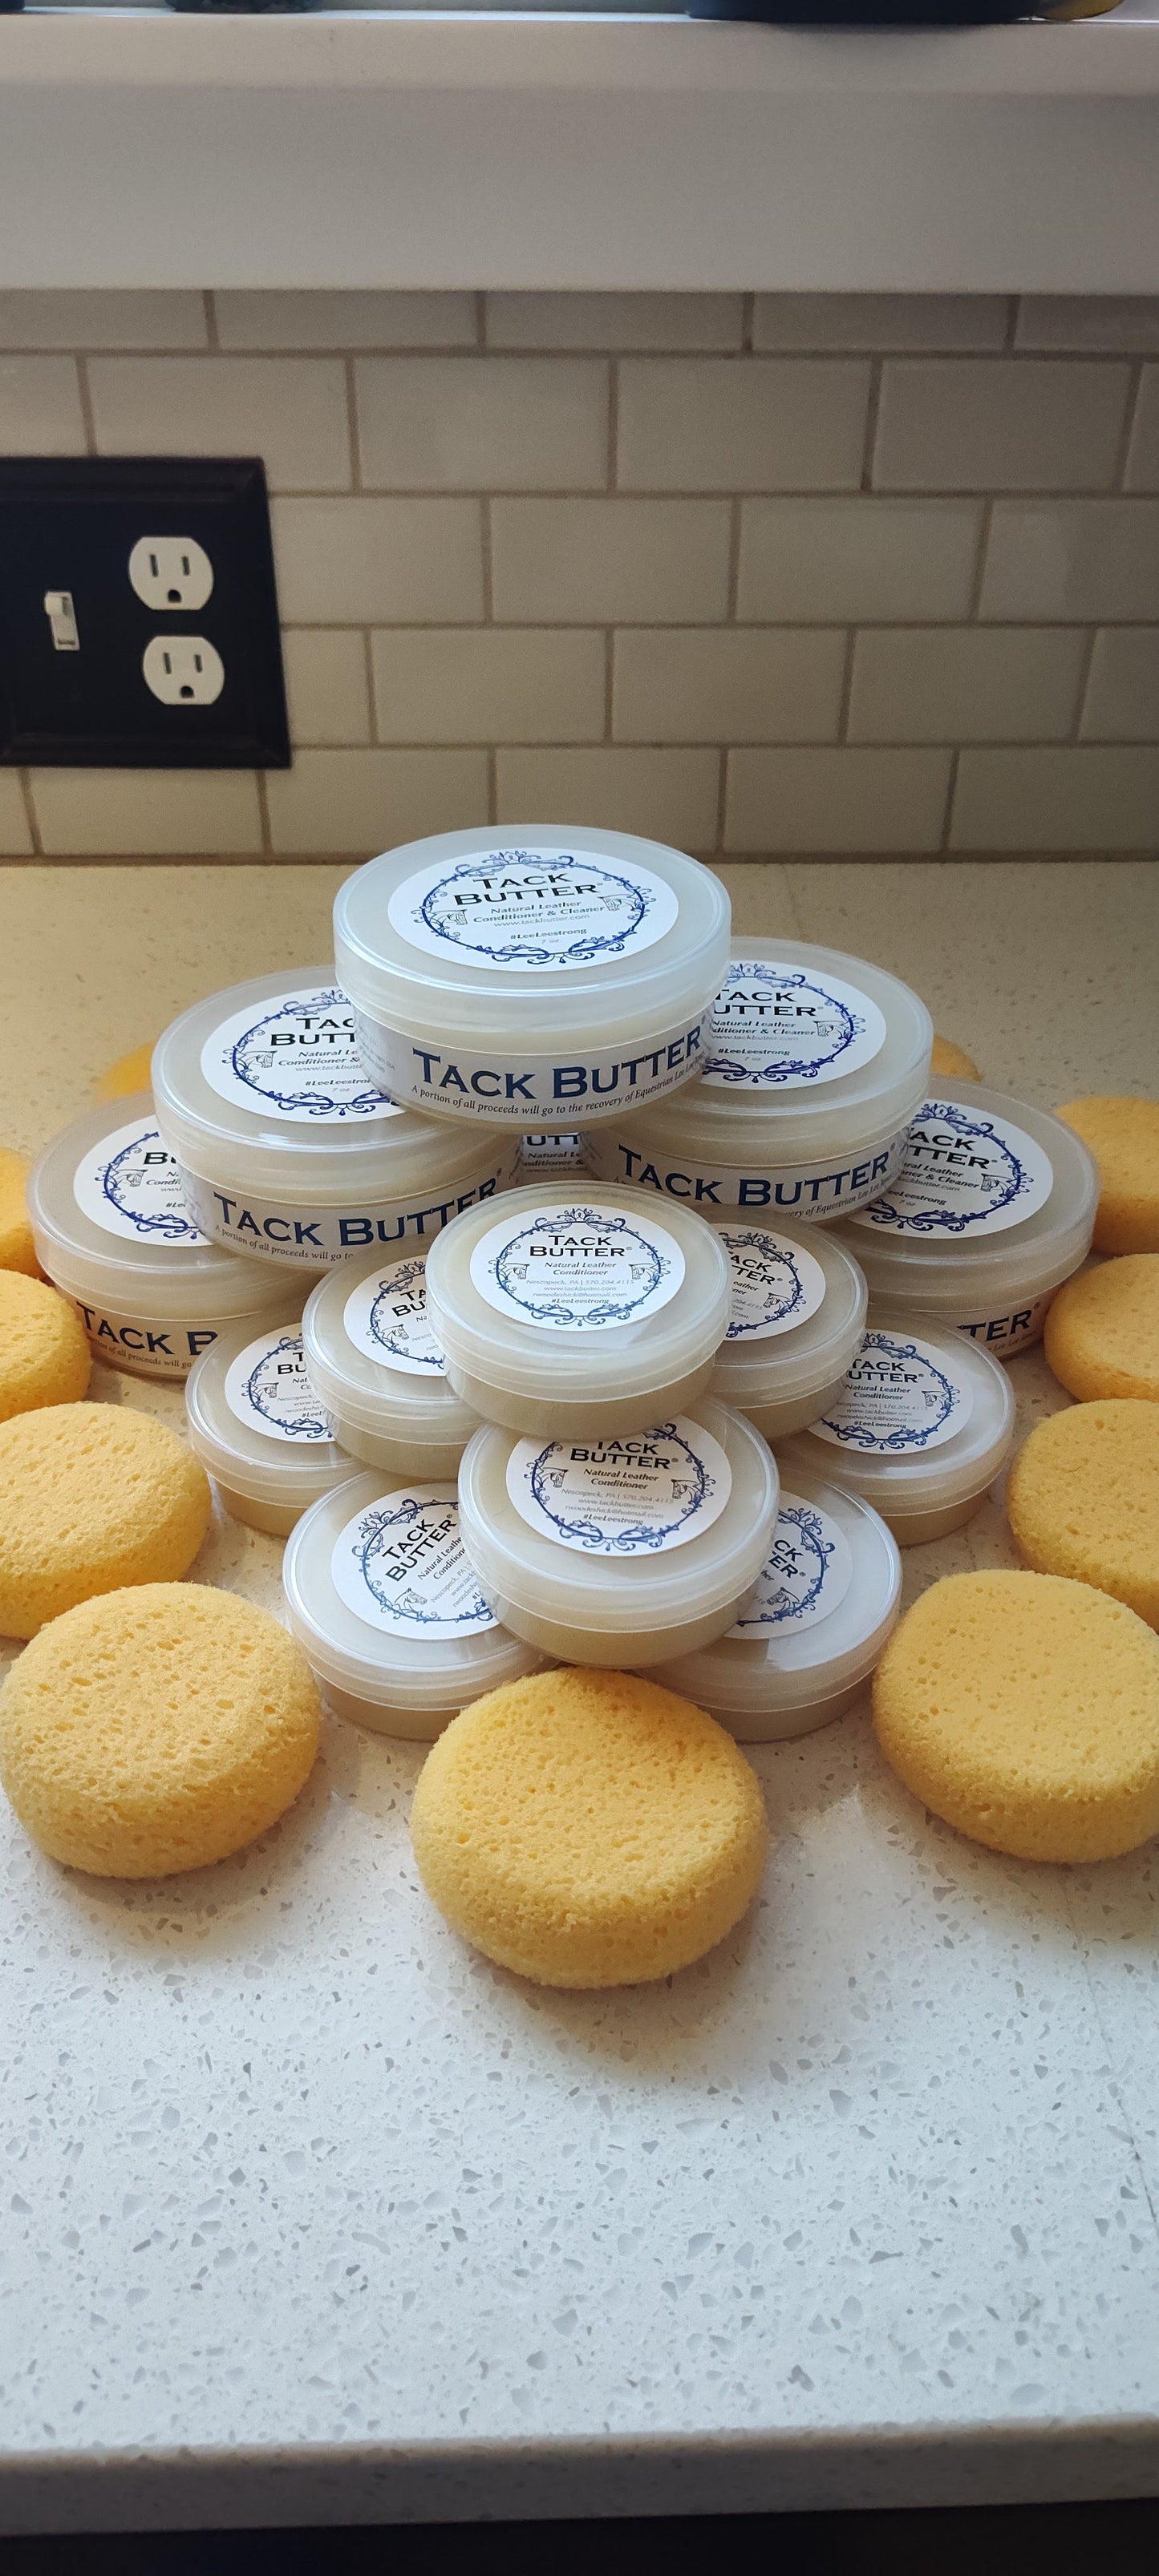 Tack Butter 3oz